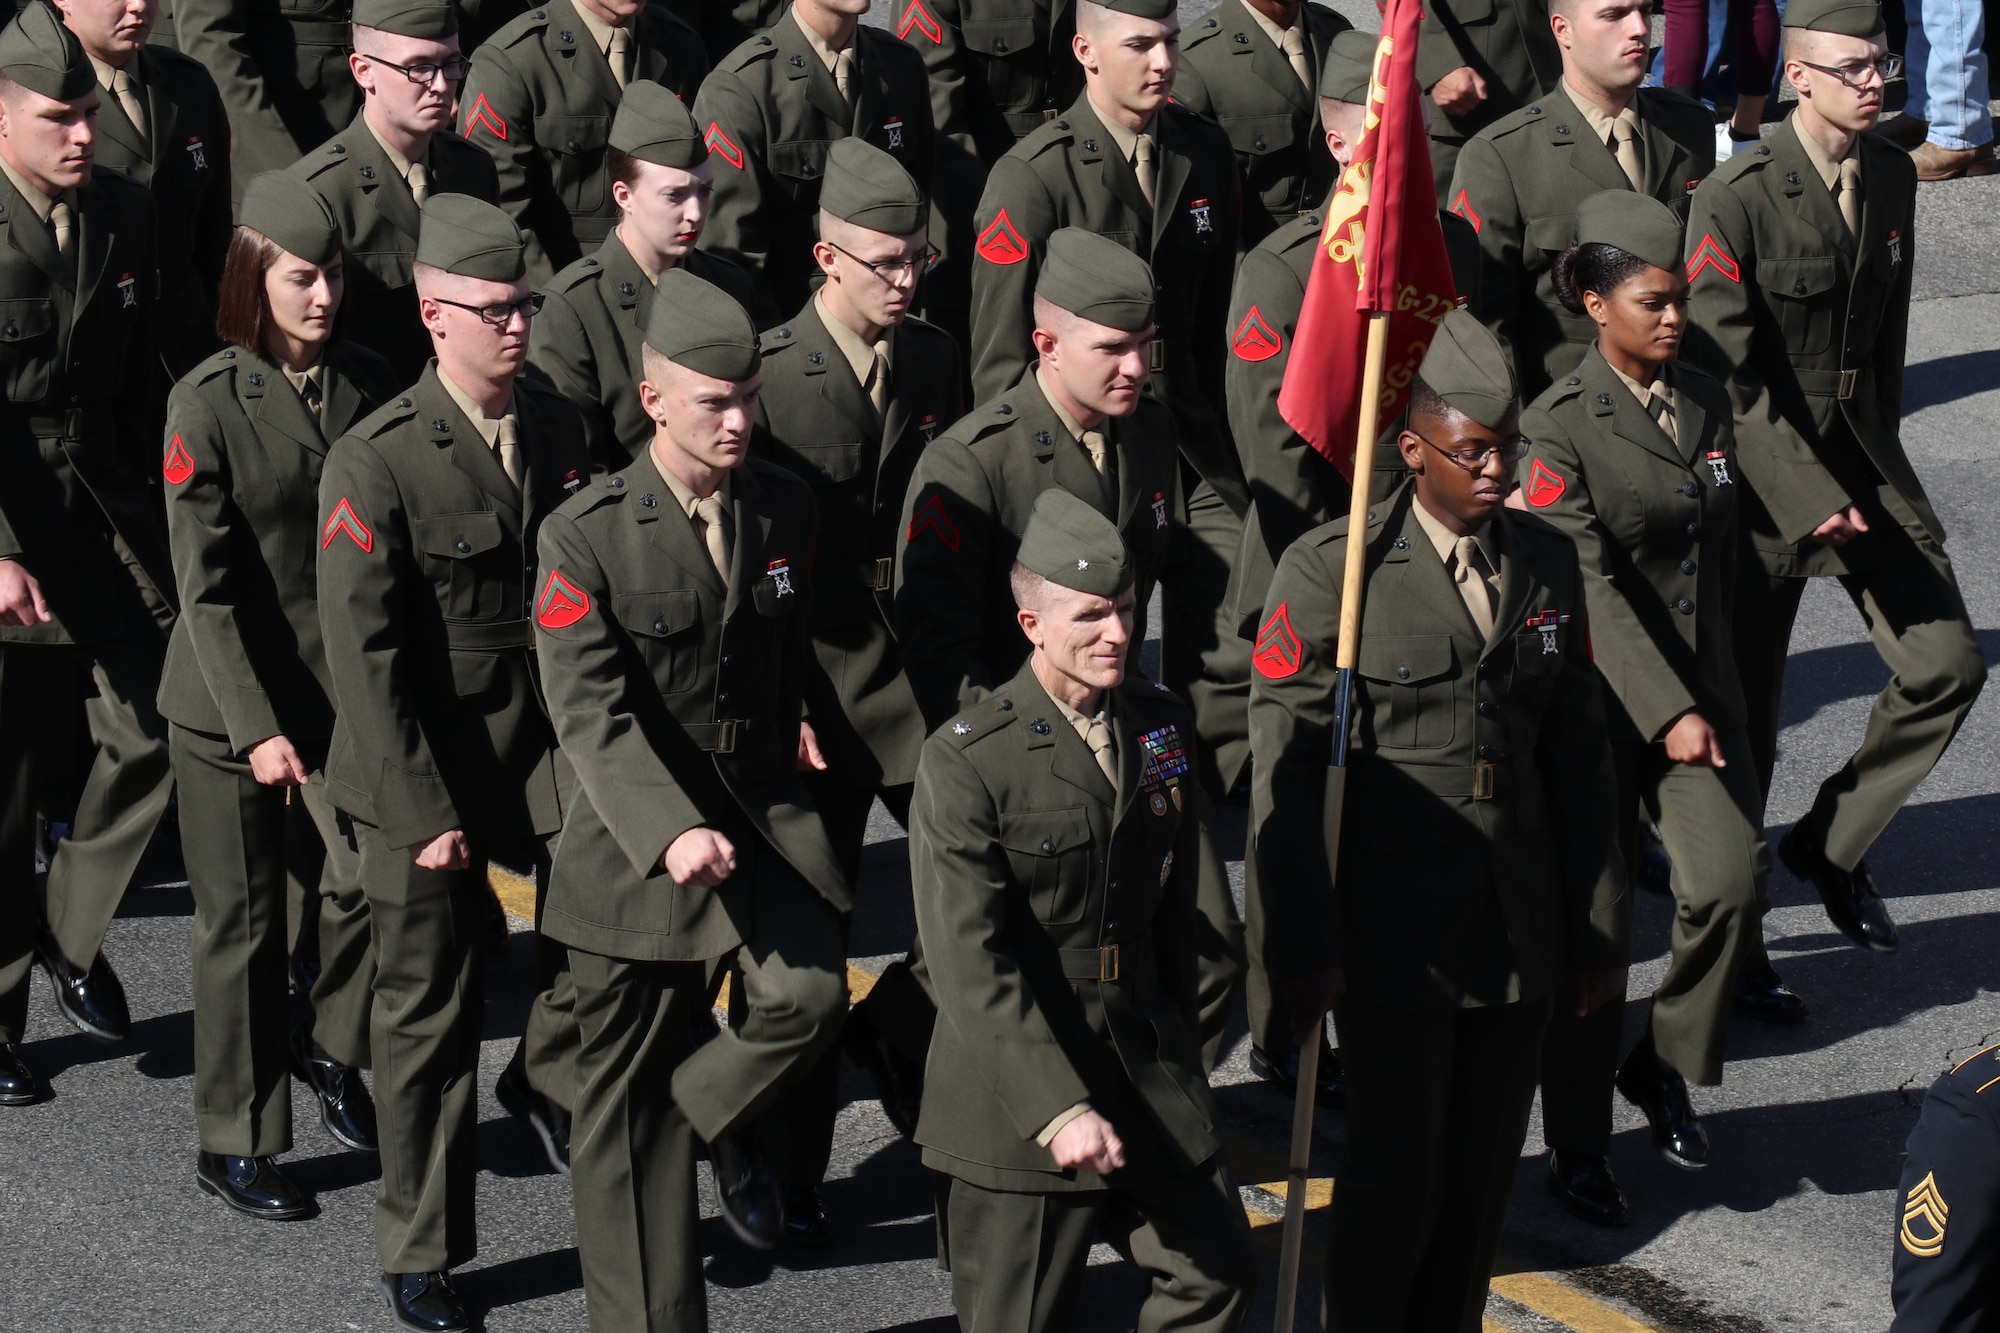 U.S. Marine Corps Lt. Col. Earl Patterson, Marine Corps Detachment Goodfellow Air Force Base commander, leads his troops during the Veterans Day Parade in San Angelo, Texas, Nov. 9, 2019. Goodfellow members from each branch marched in the parade to show their support. (U.S. Air Force photo by Airman 1st Class Zachary Chapman/Released)